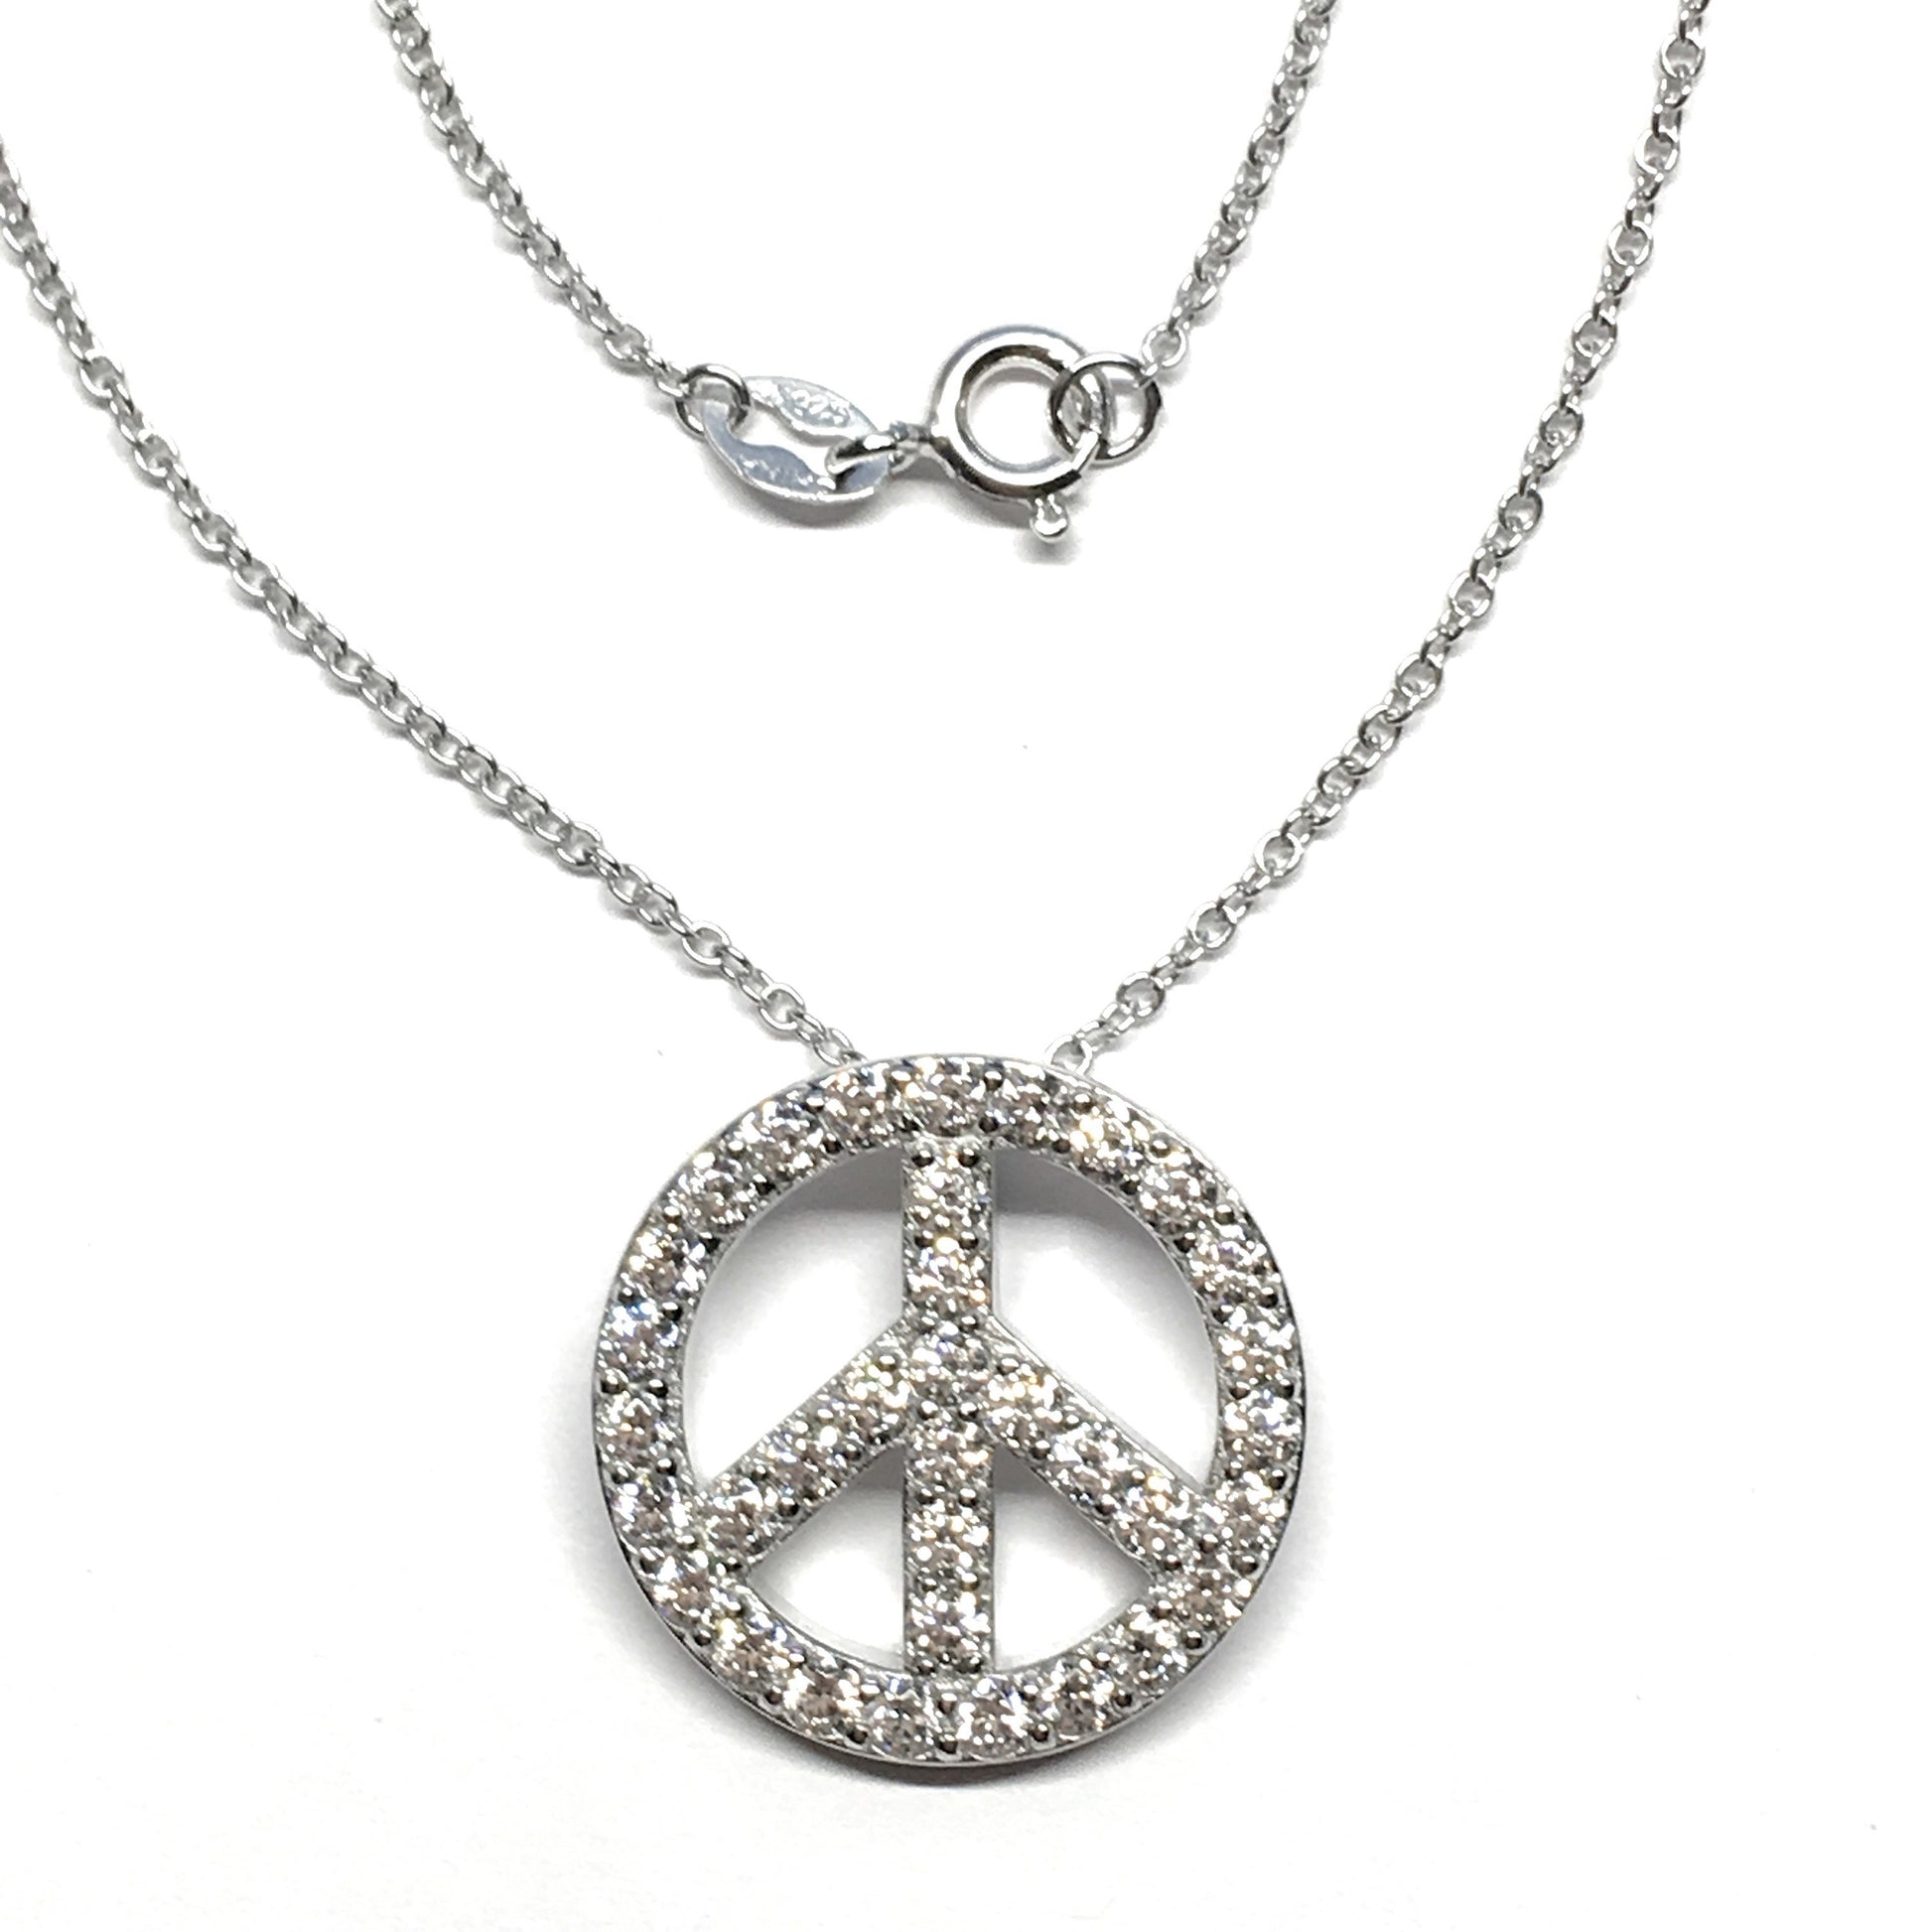 Jewelry > Necklaces | STATEMENT Stunning Sparkly Sterling Silver Peace Symbol Pendant Necklace  - Blingschlingers Jewelry